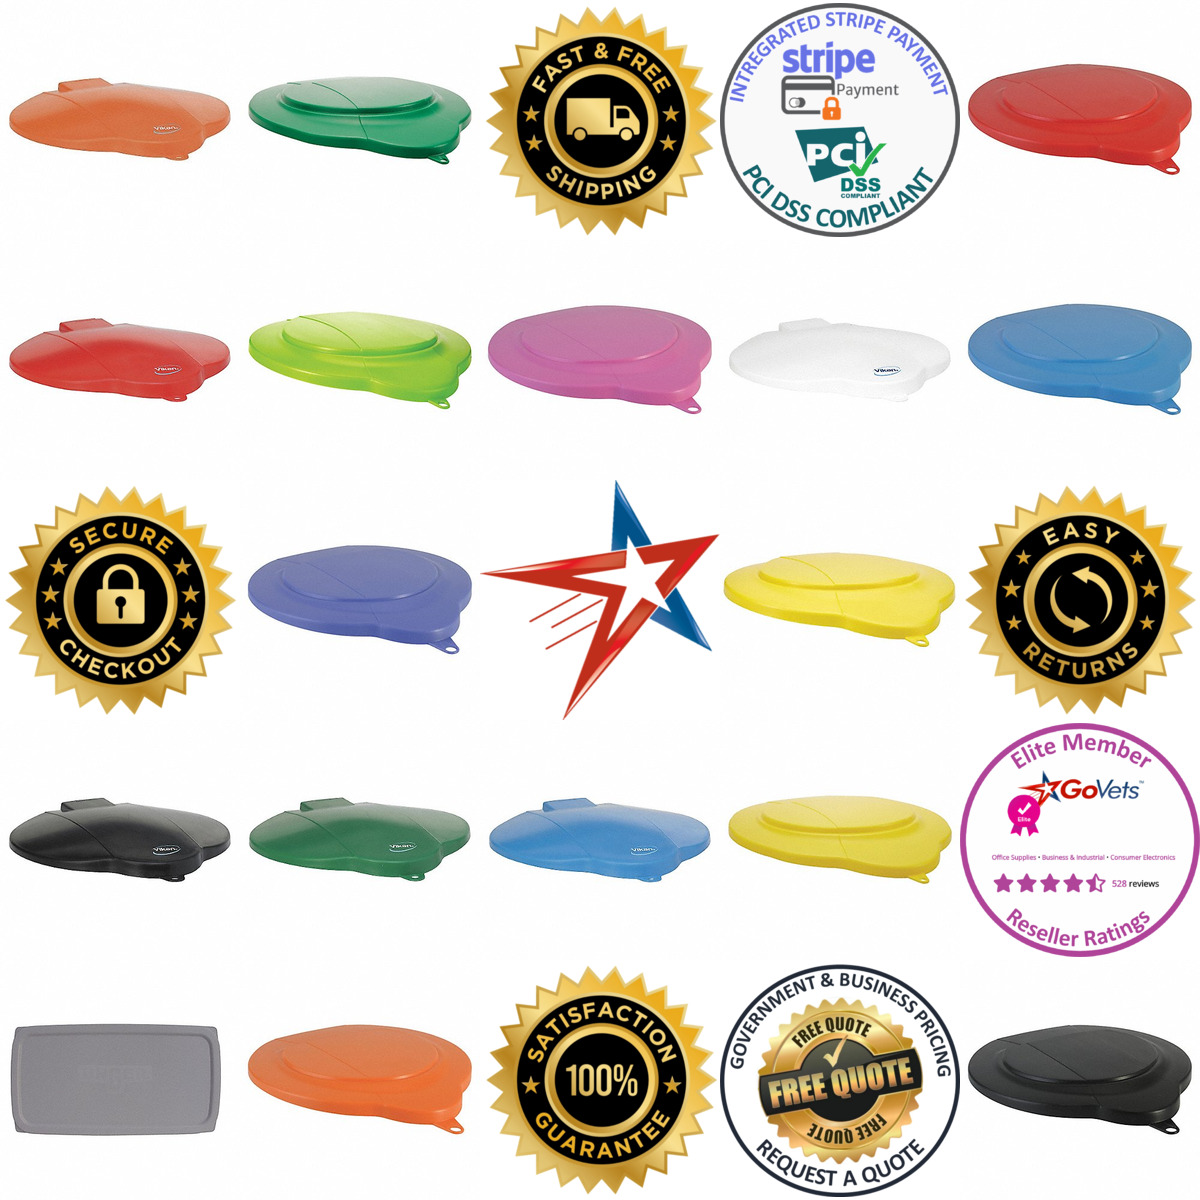 A selection of Lids For Buckets and Pails products on GoVets